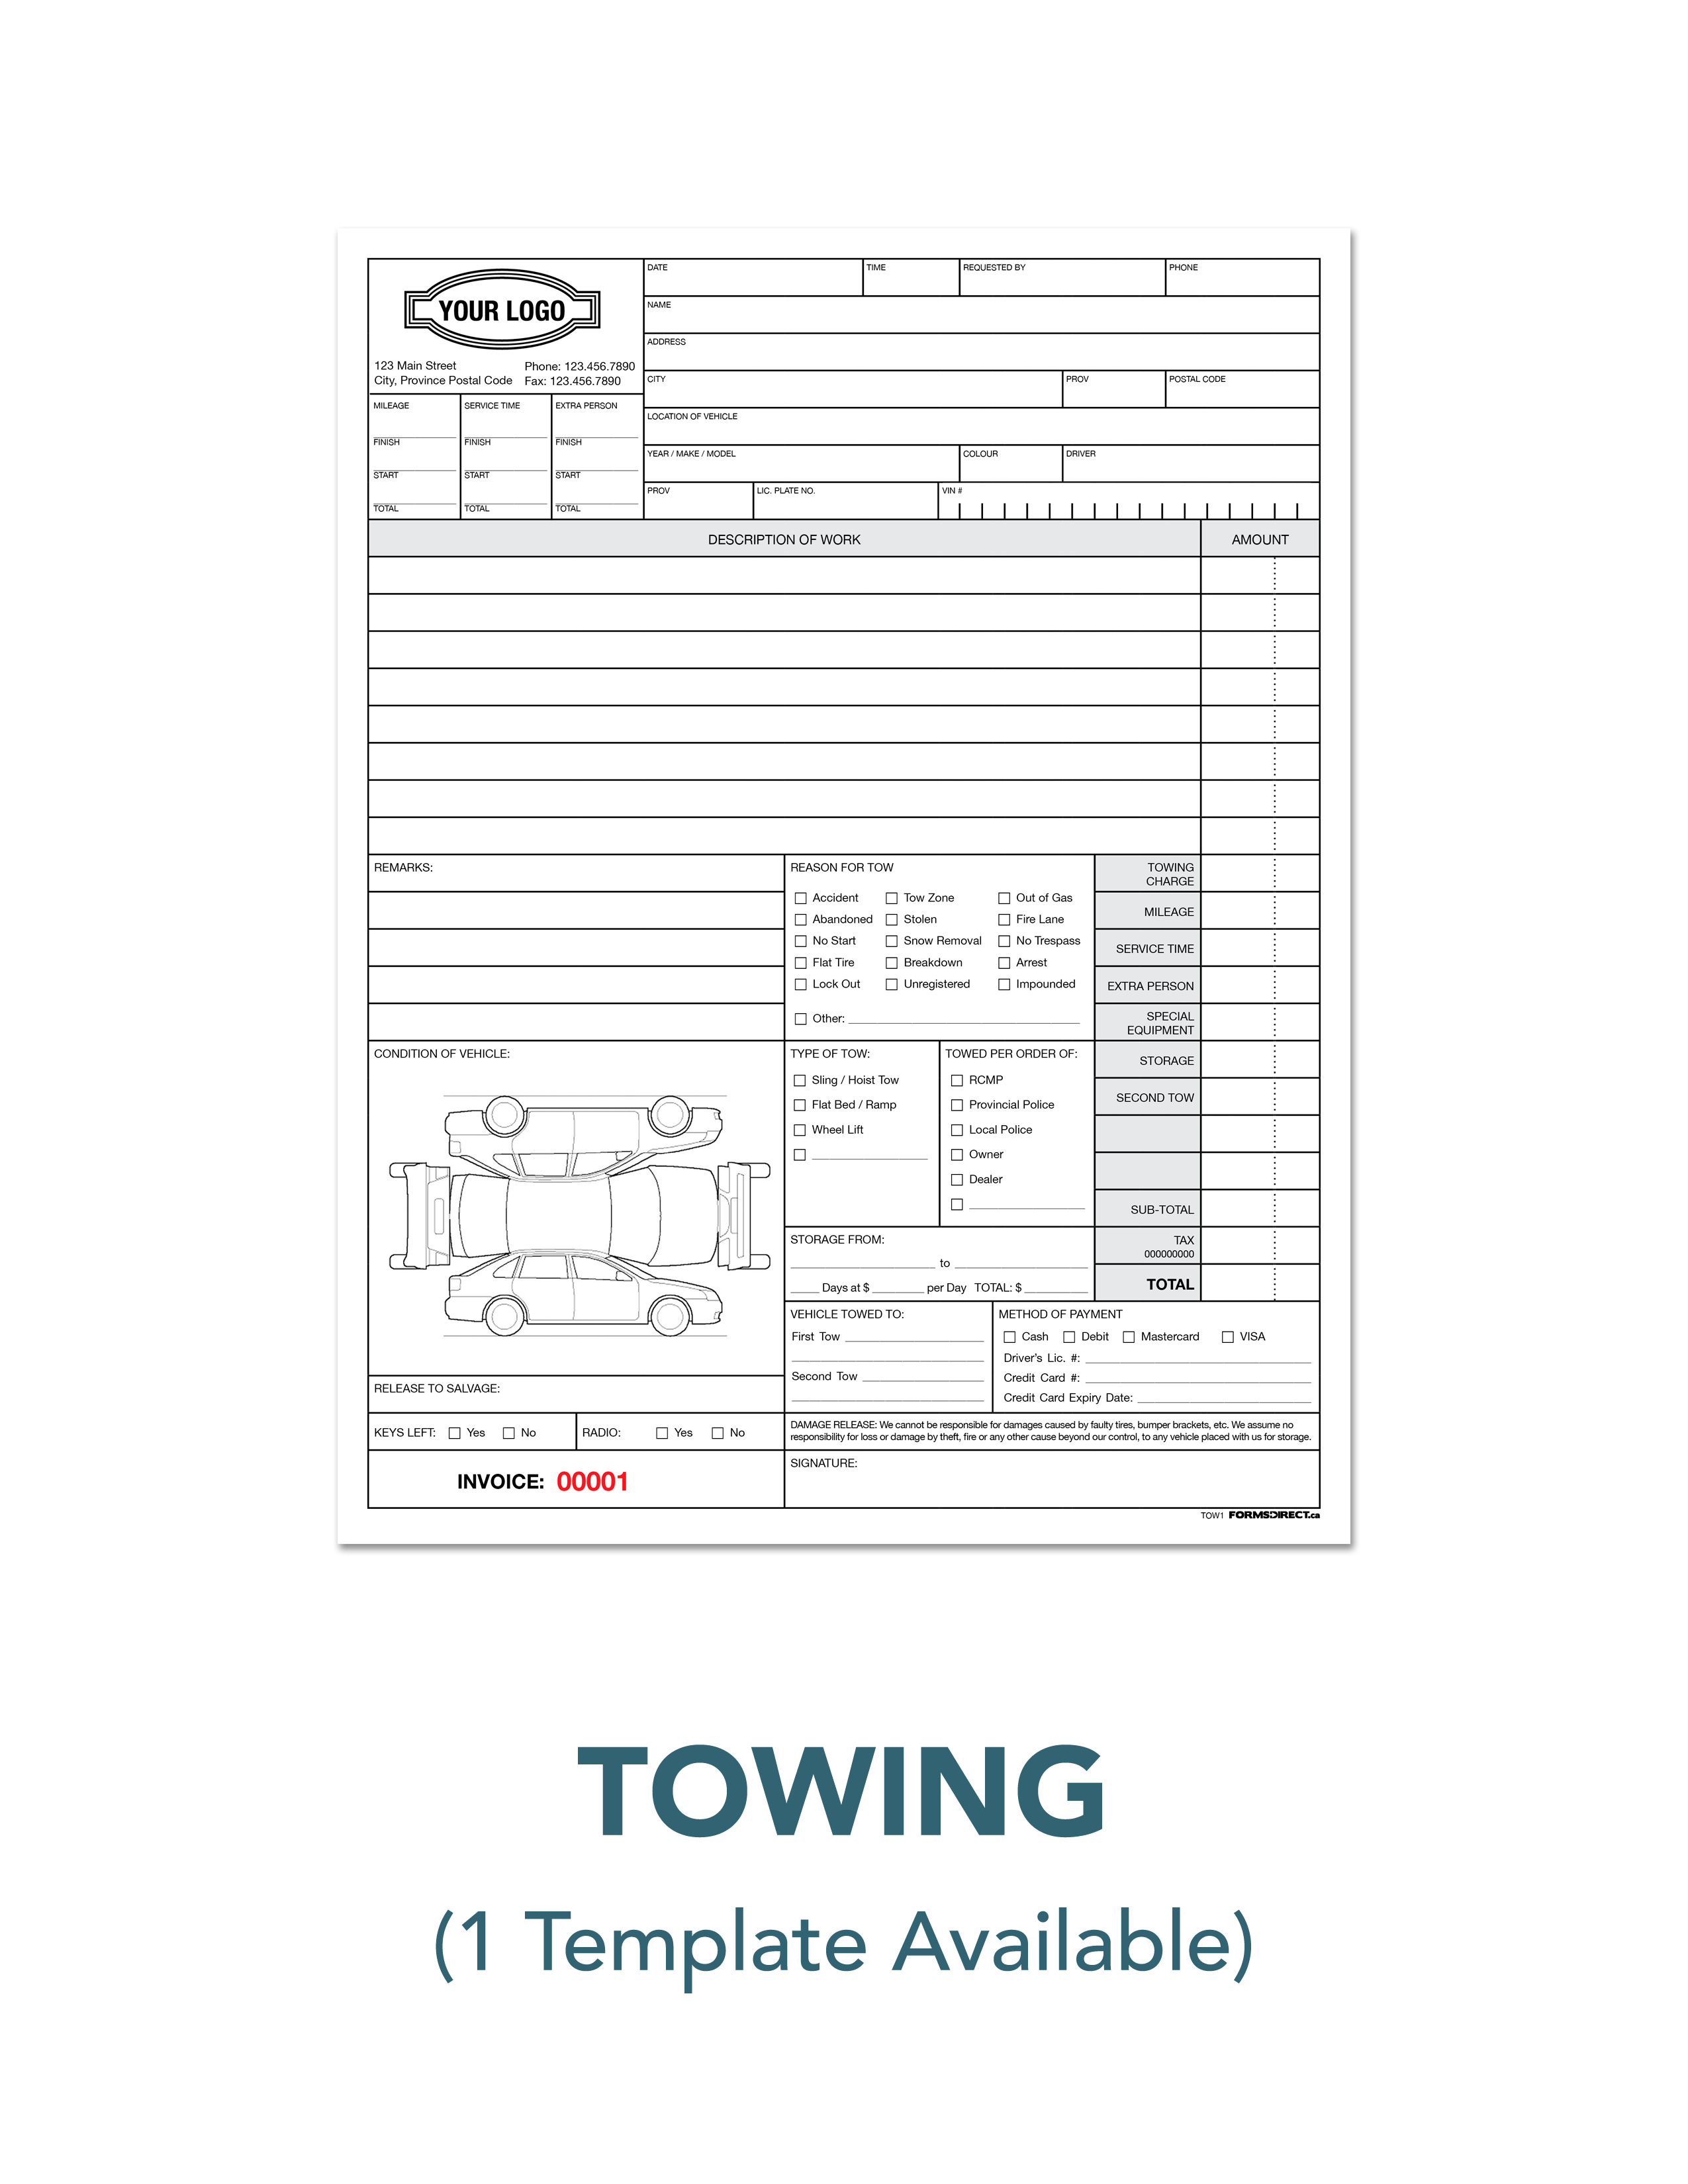 Towing Invoices & Receipts Roadside Auto Recovery Authorization Form